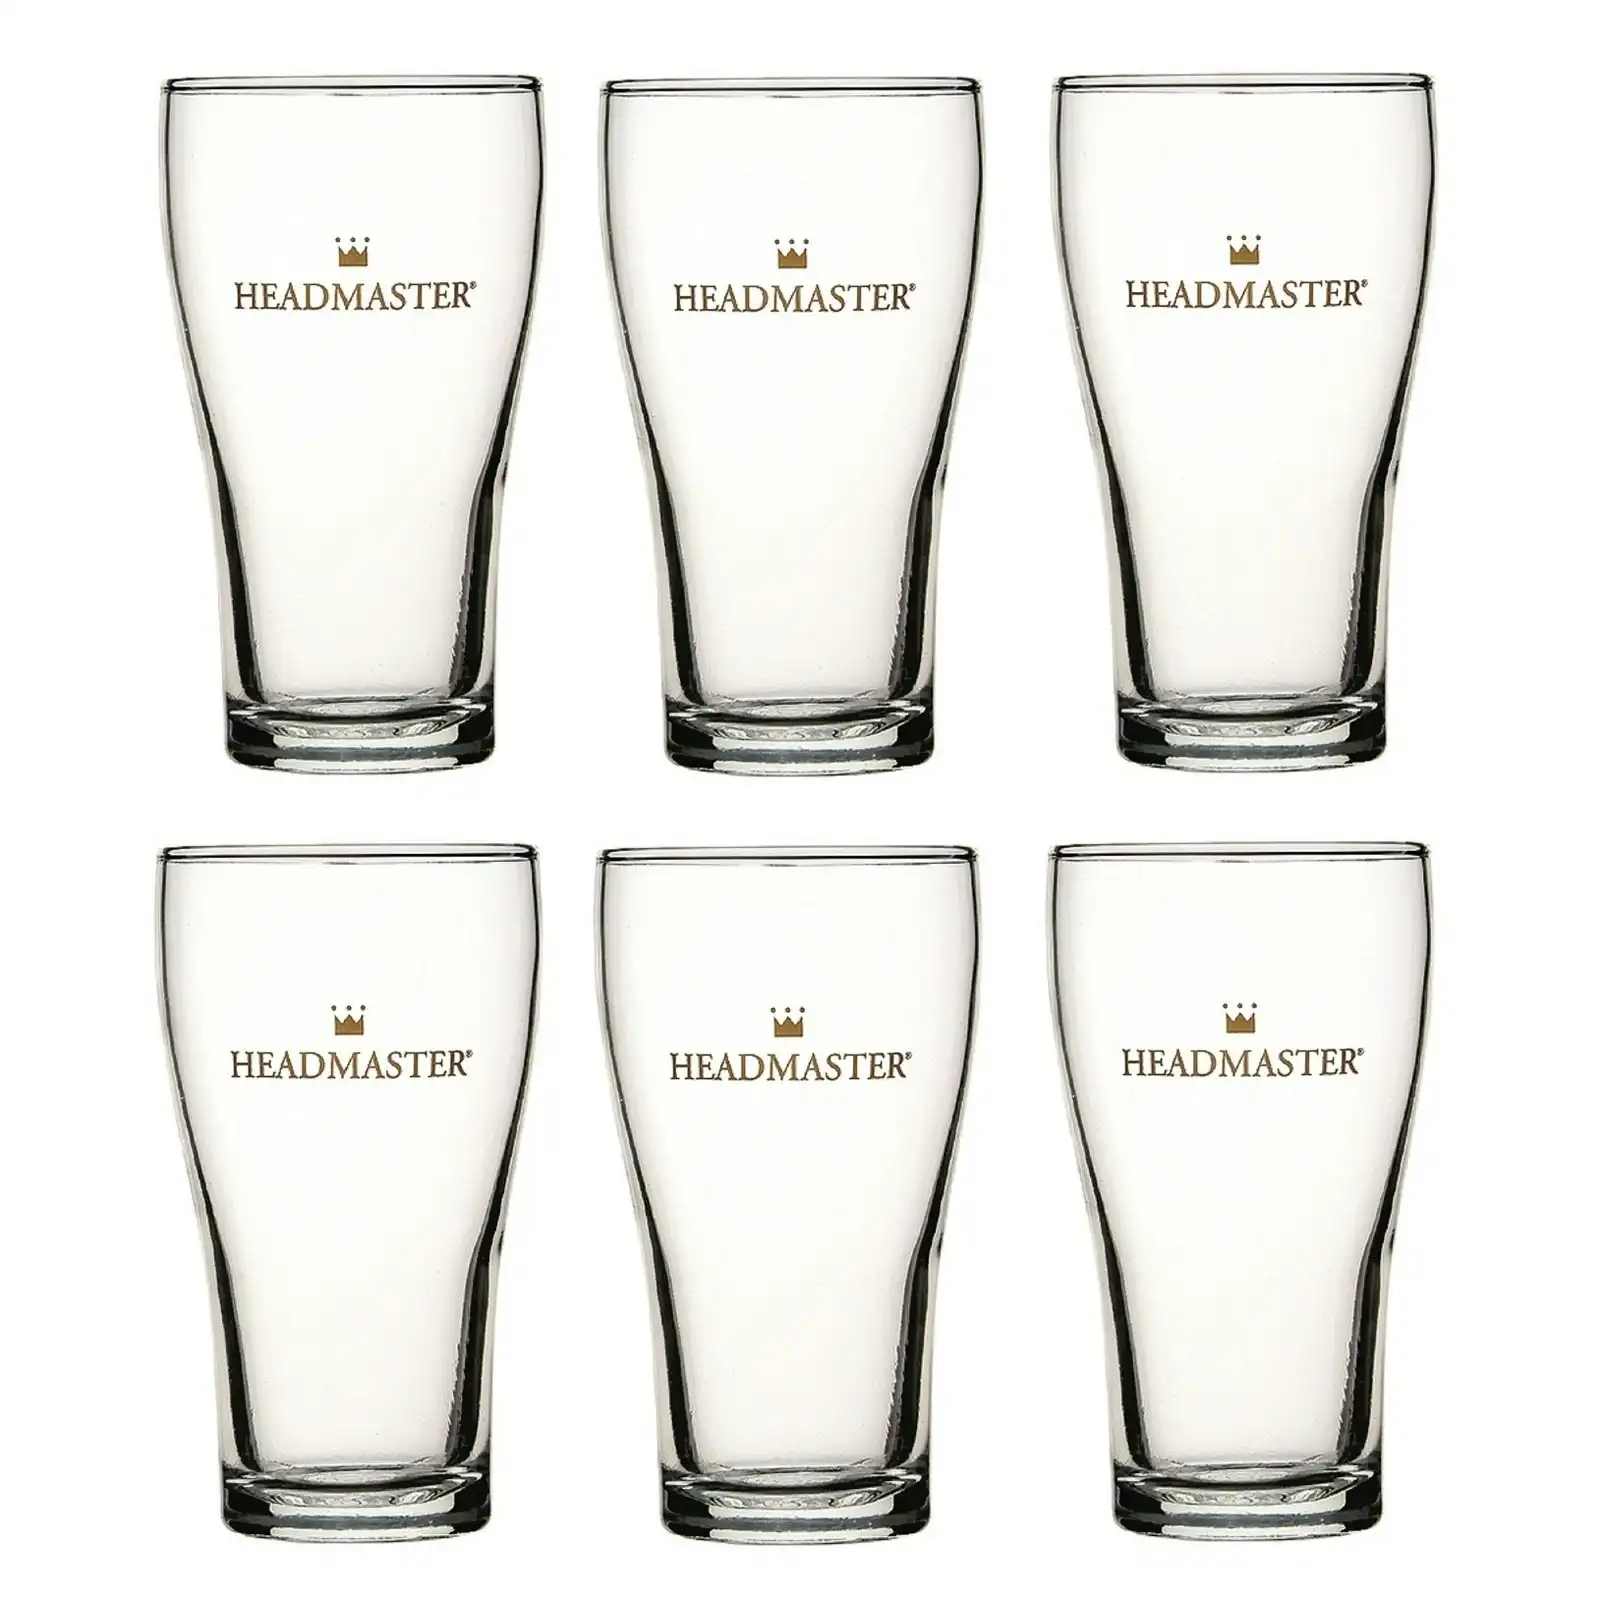 CROWN NUCLEATED Headmaster BEER CONICAL GLASSES 285ml - Set of 48